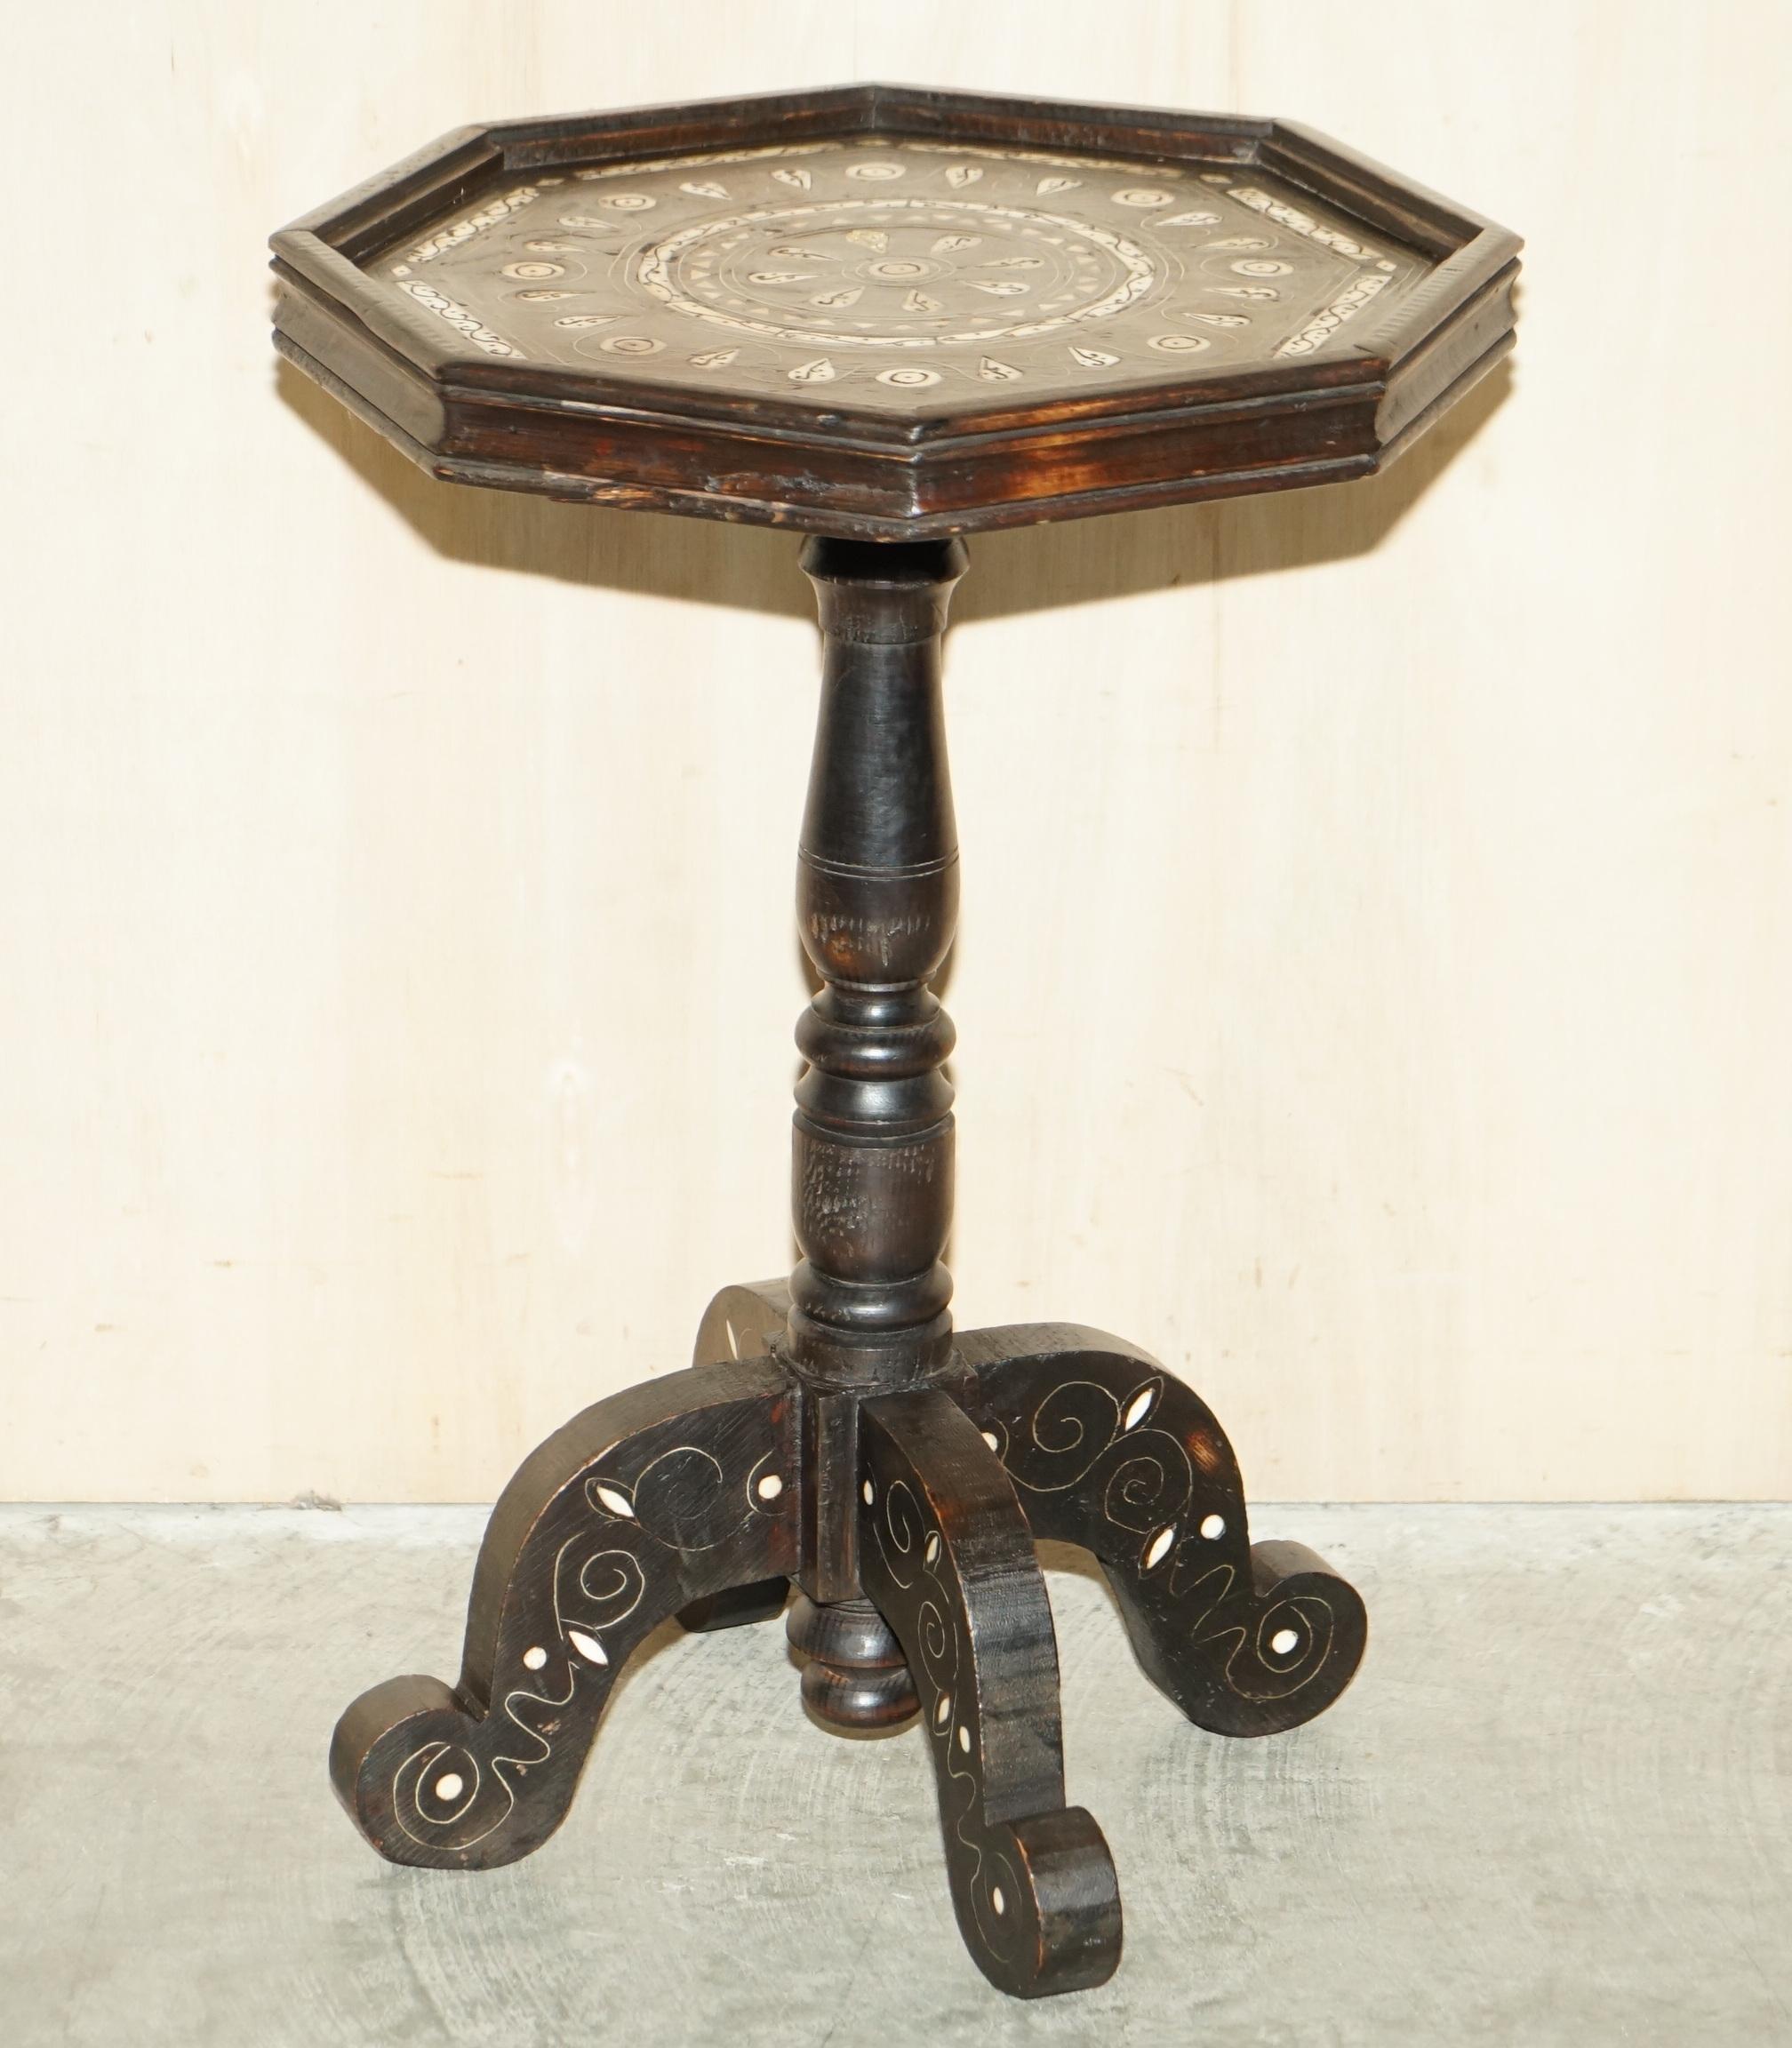 We are delighted to offer for sale this rare 19th century hand carved Liberty's London side, end table.

A very good looking well-made and decorative piece, Liberty’s London was the first company to import these around 1870, they are highly